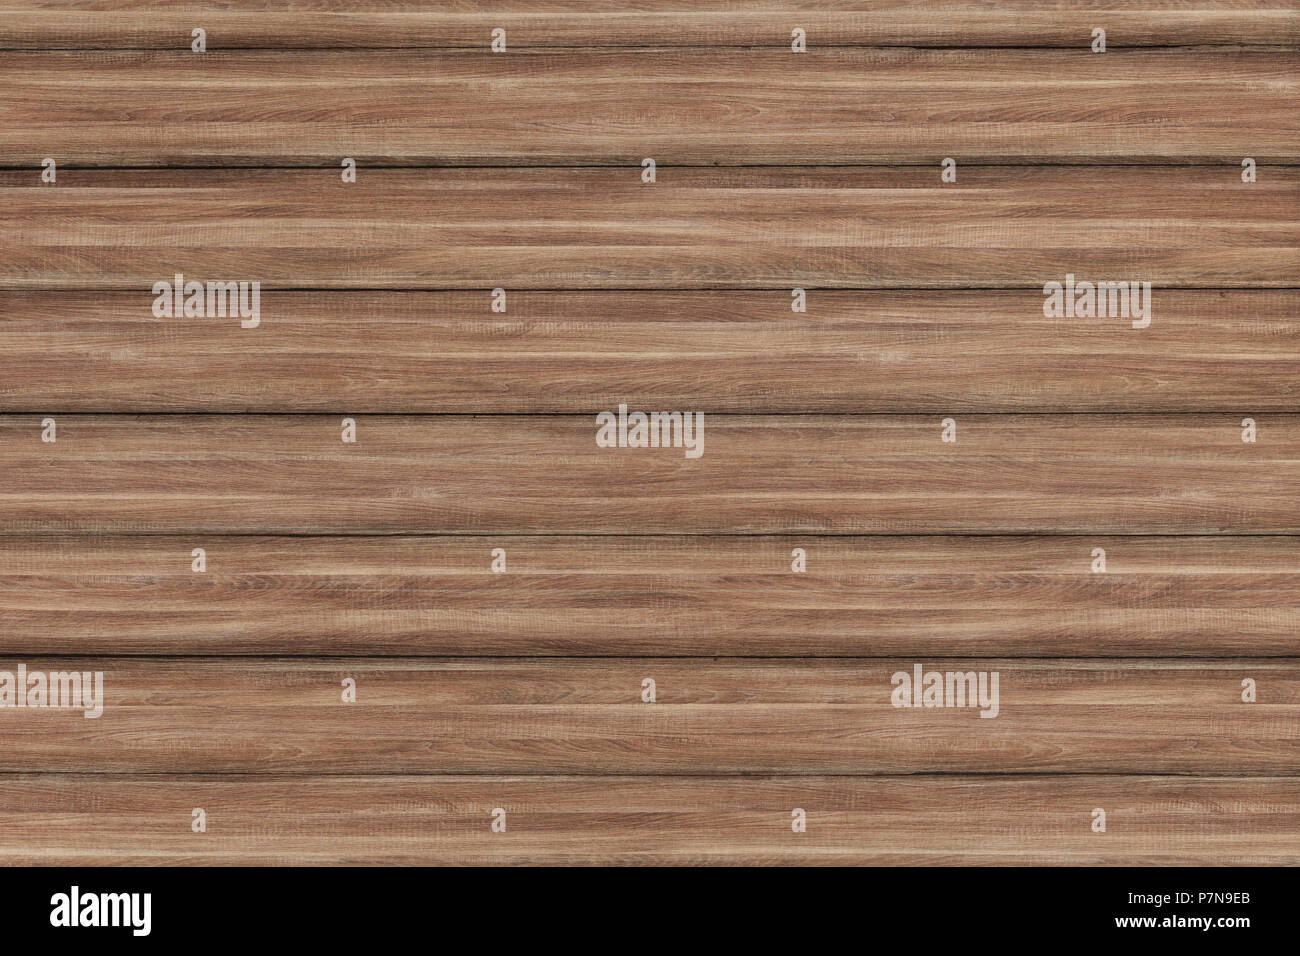 grunge wood panels, close up of wall made of wooden planks Stock Photo